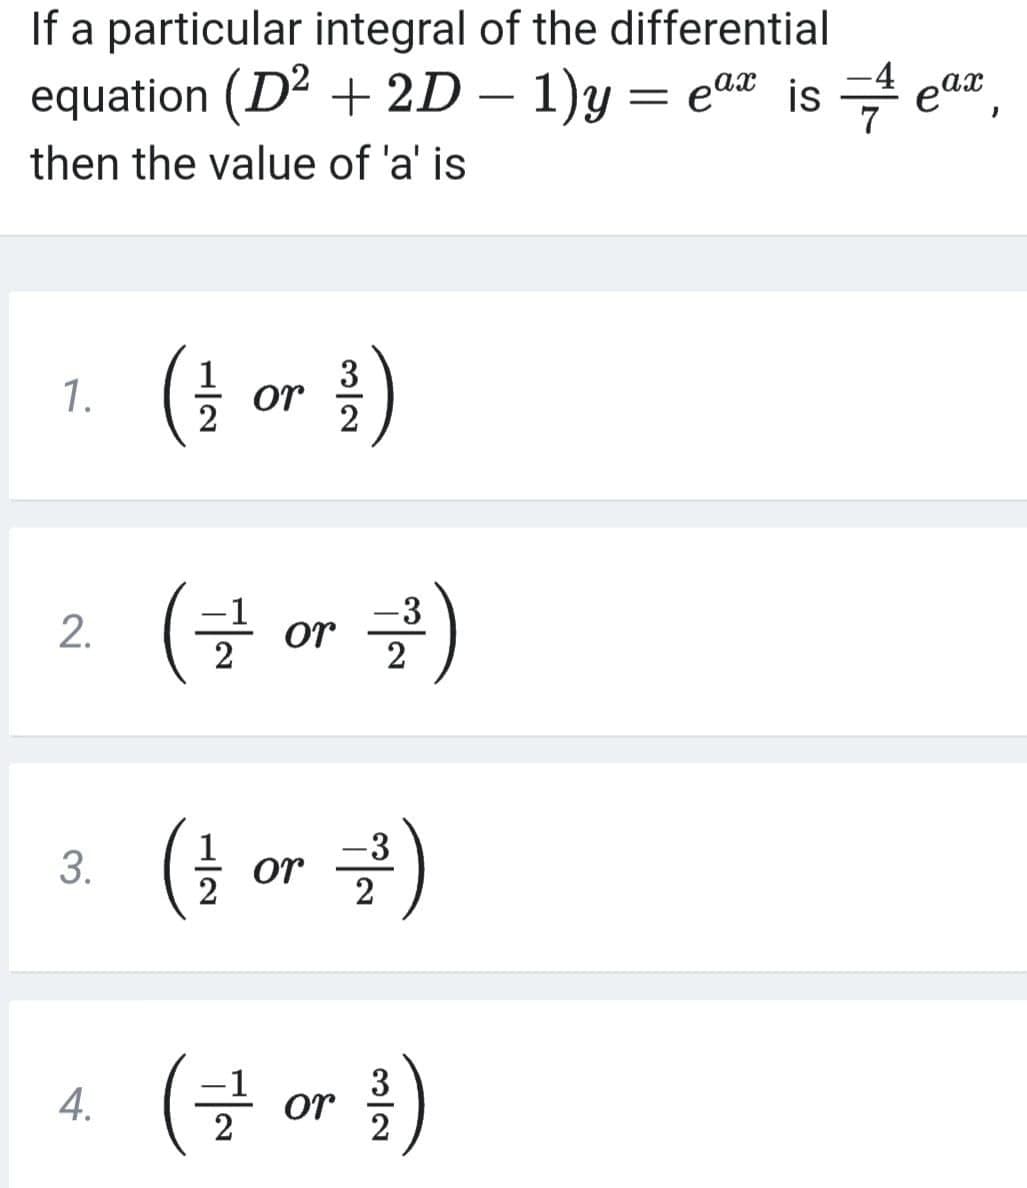 If a particular integral of the differential
equation (D² + 2D – 1)y = ea is e
then the value of 'a' is
-4
= elit
ax
(† or )
3
1.
2
-3
or
(늘 or 글)
(글 or )
3
4.
2
2.
3.
